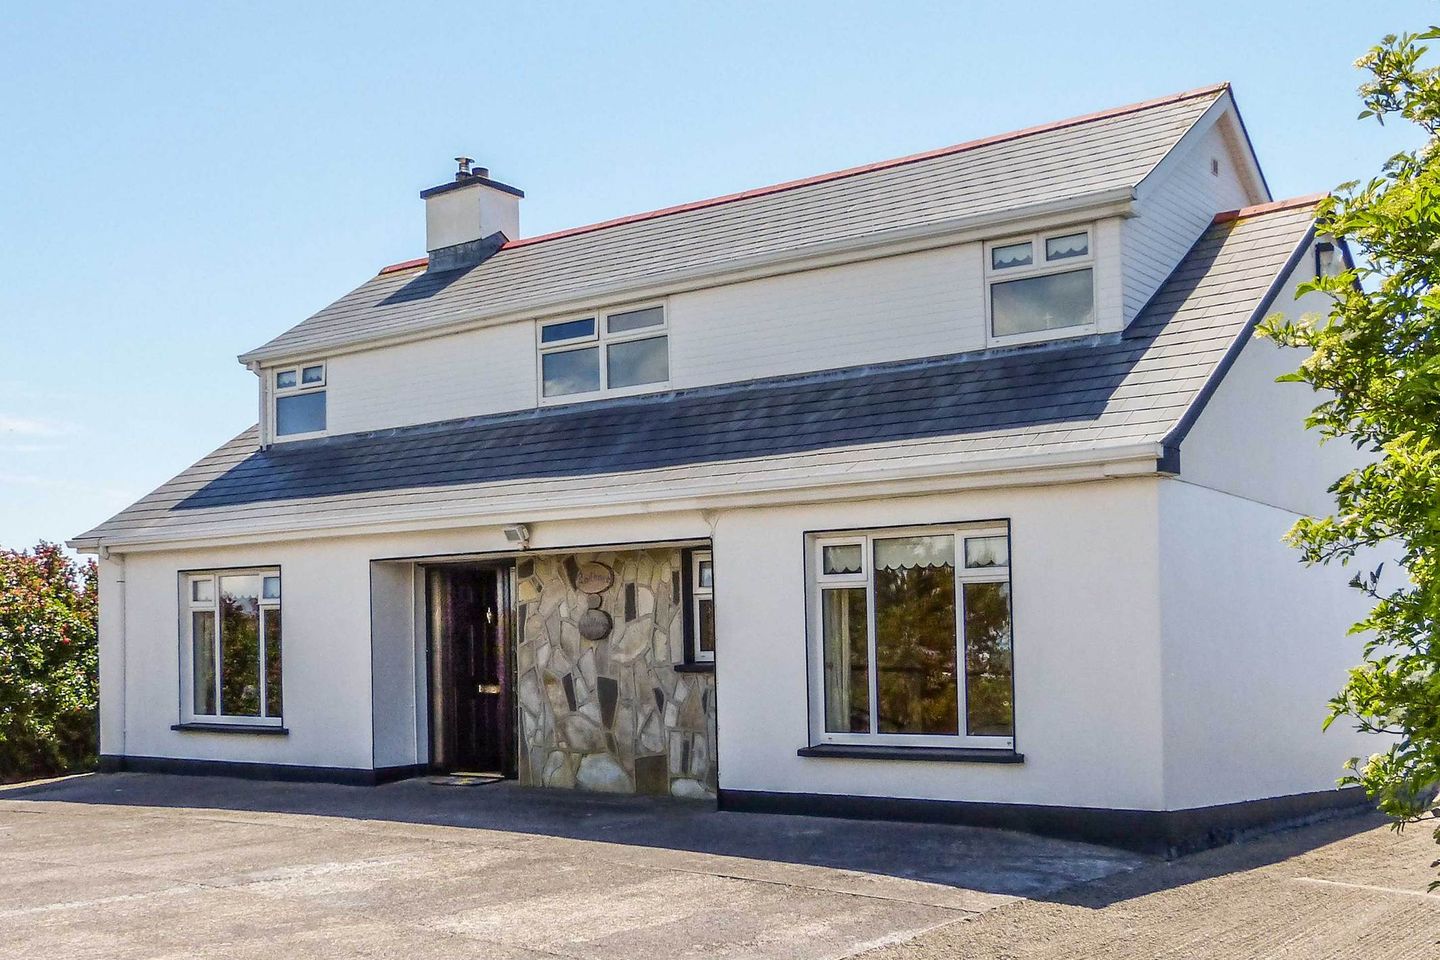 Ref. 912411 Hernon's Cottage, Carna, Co. Galway